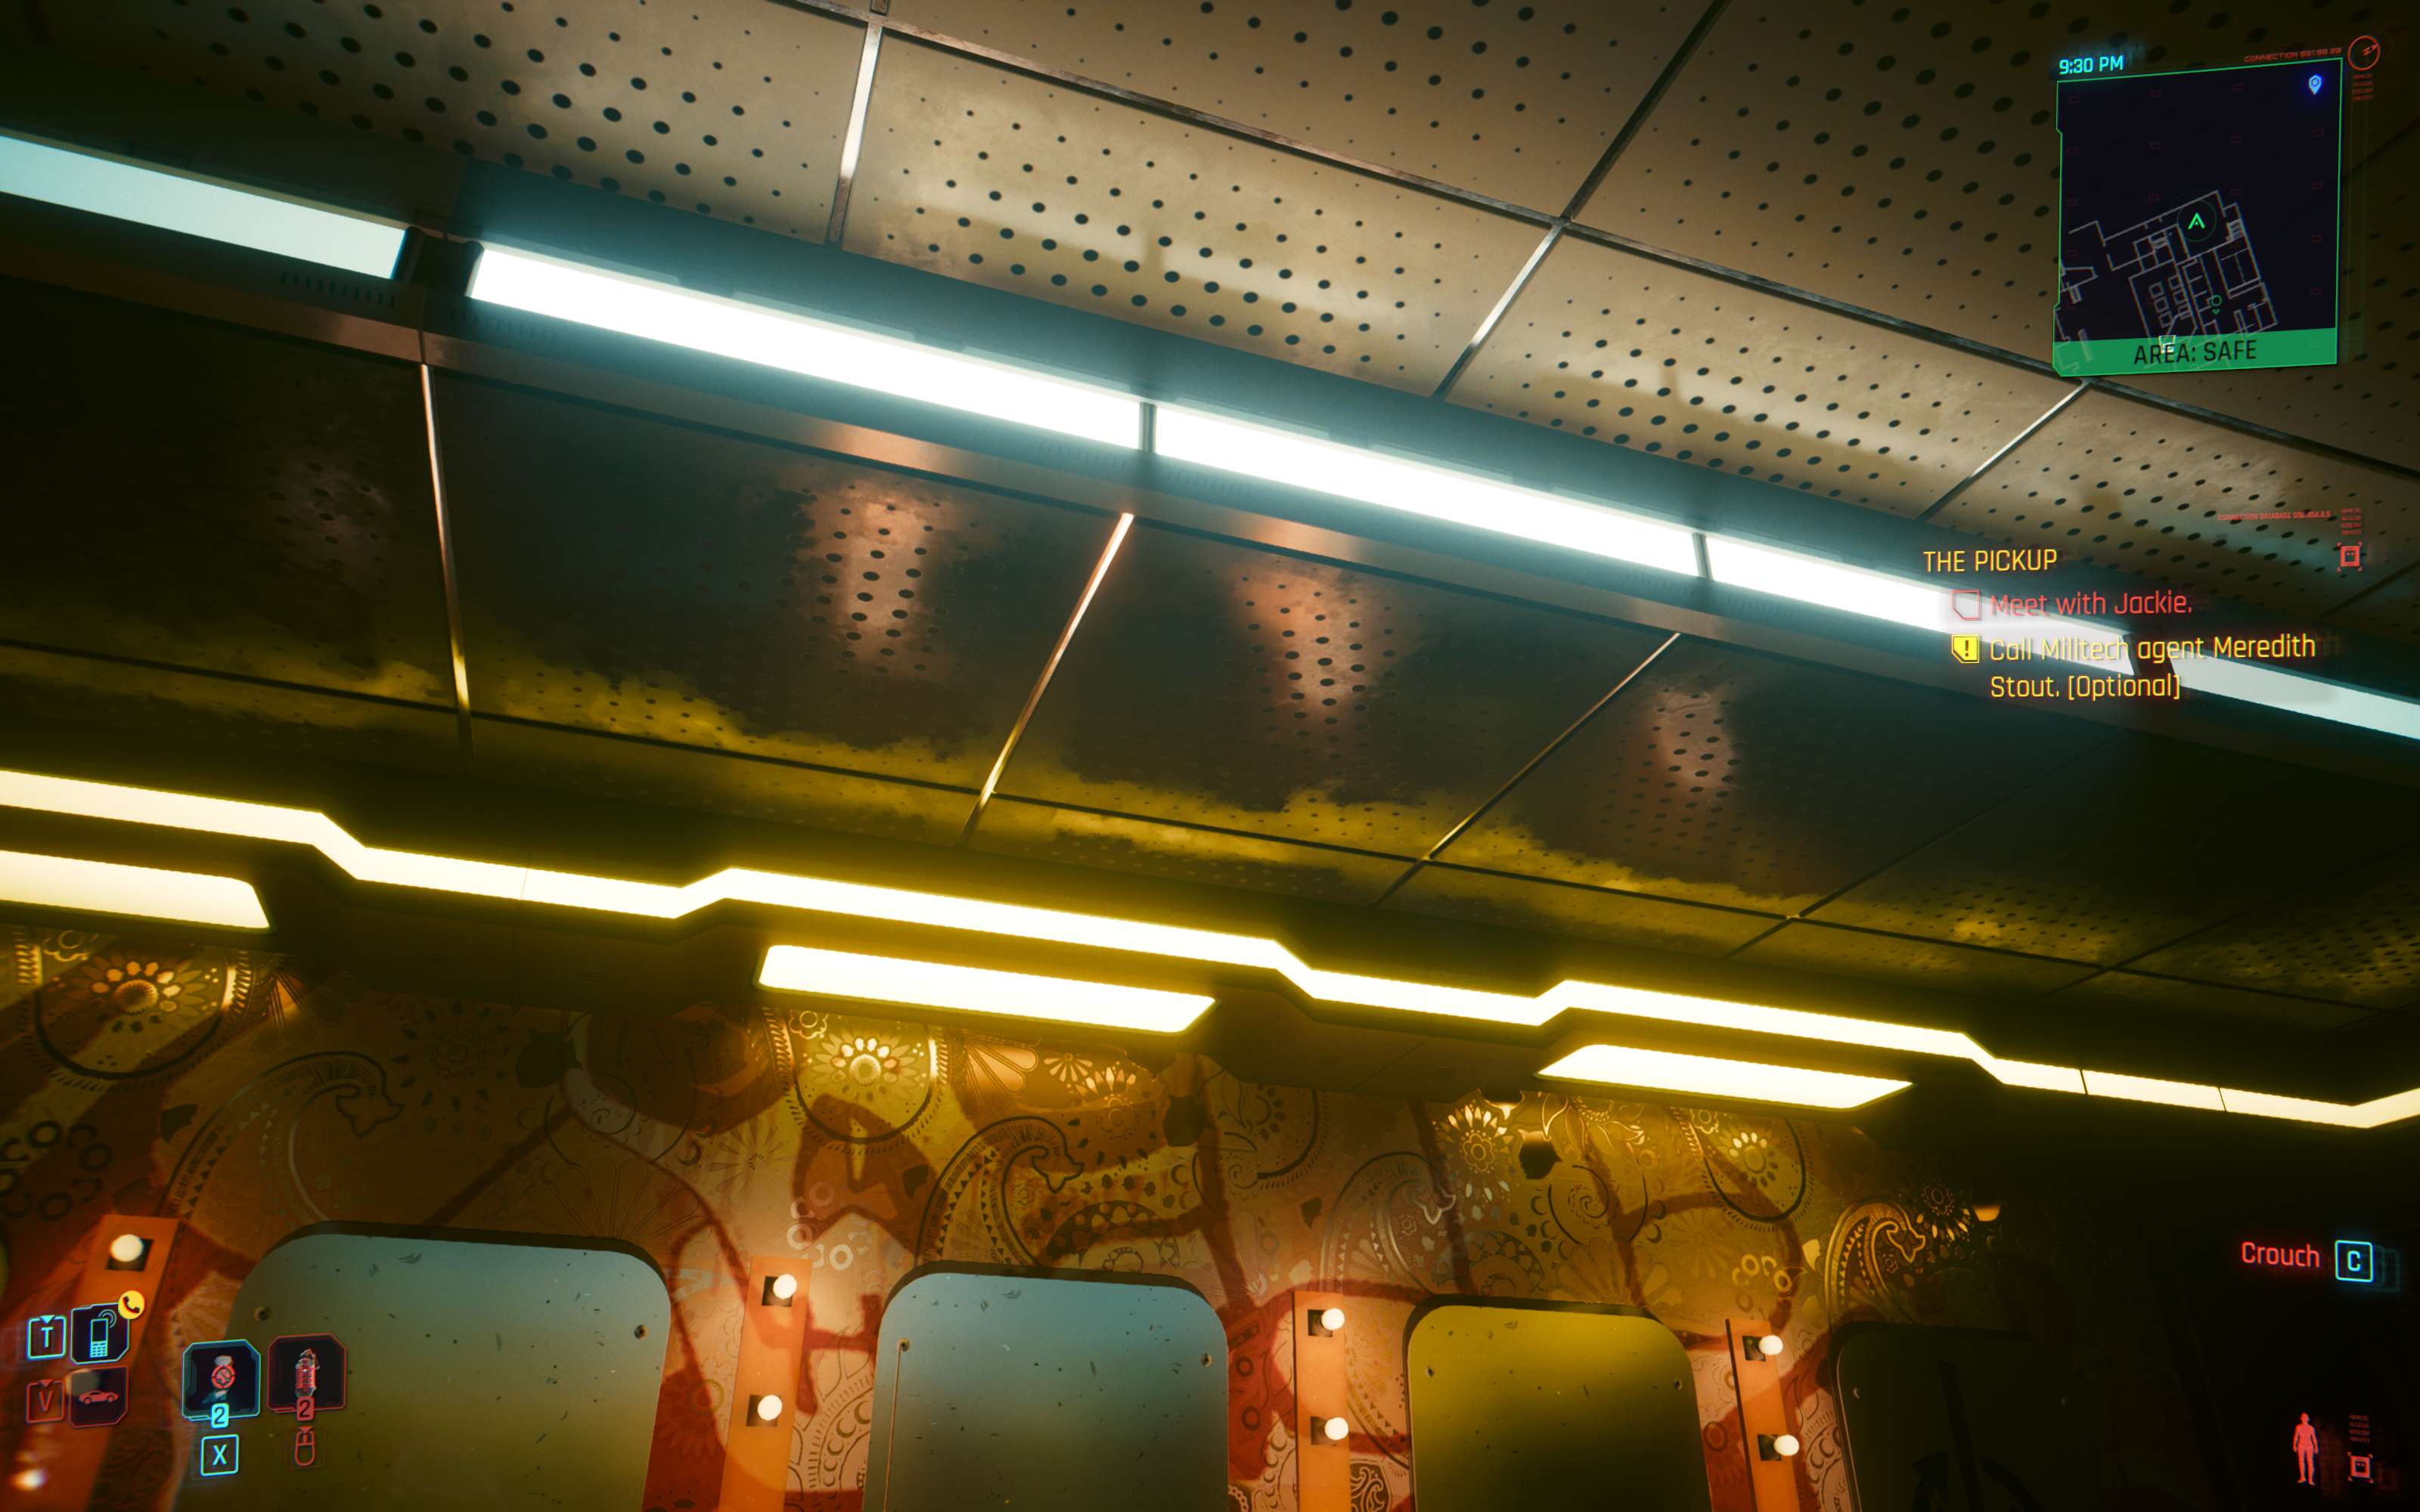 A screenshot of a ceiling with light reflections from the game "Cyberpunk 2077."